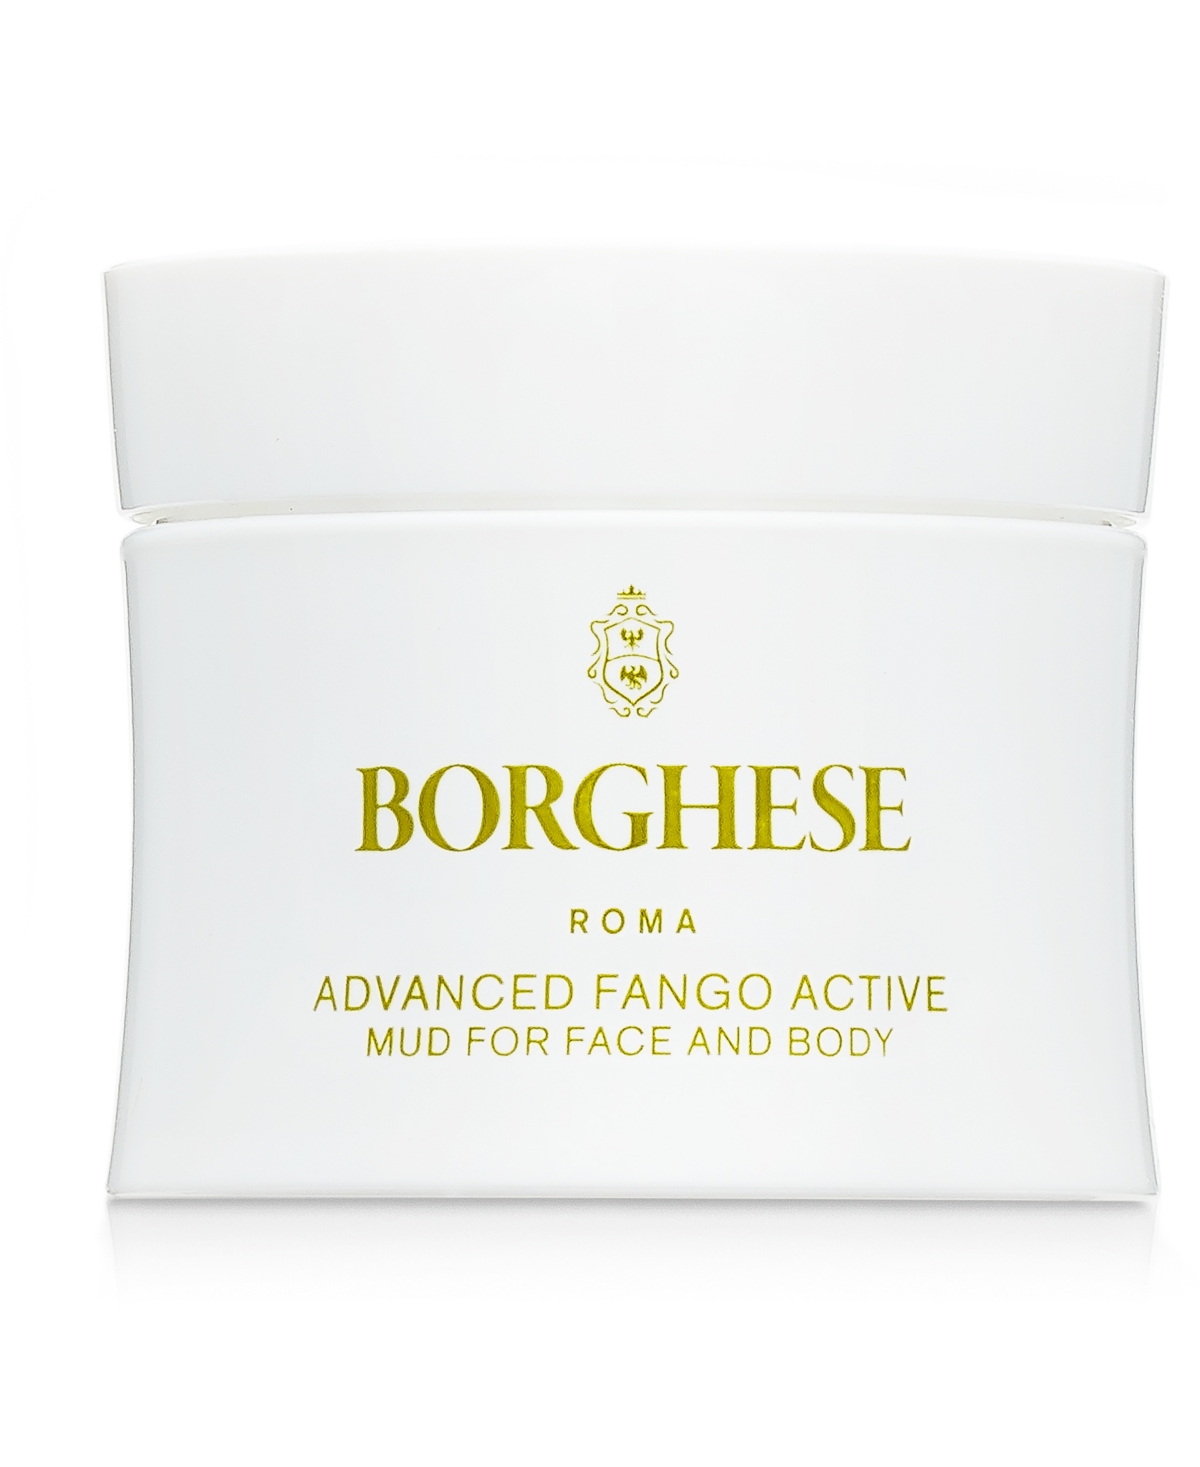 Borghese Advanced Fango Active Purifying Mud for Face and Body, 0.5-oz.